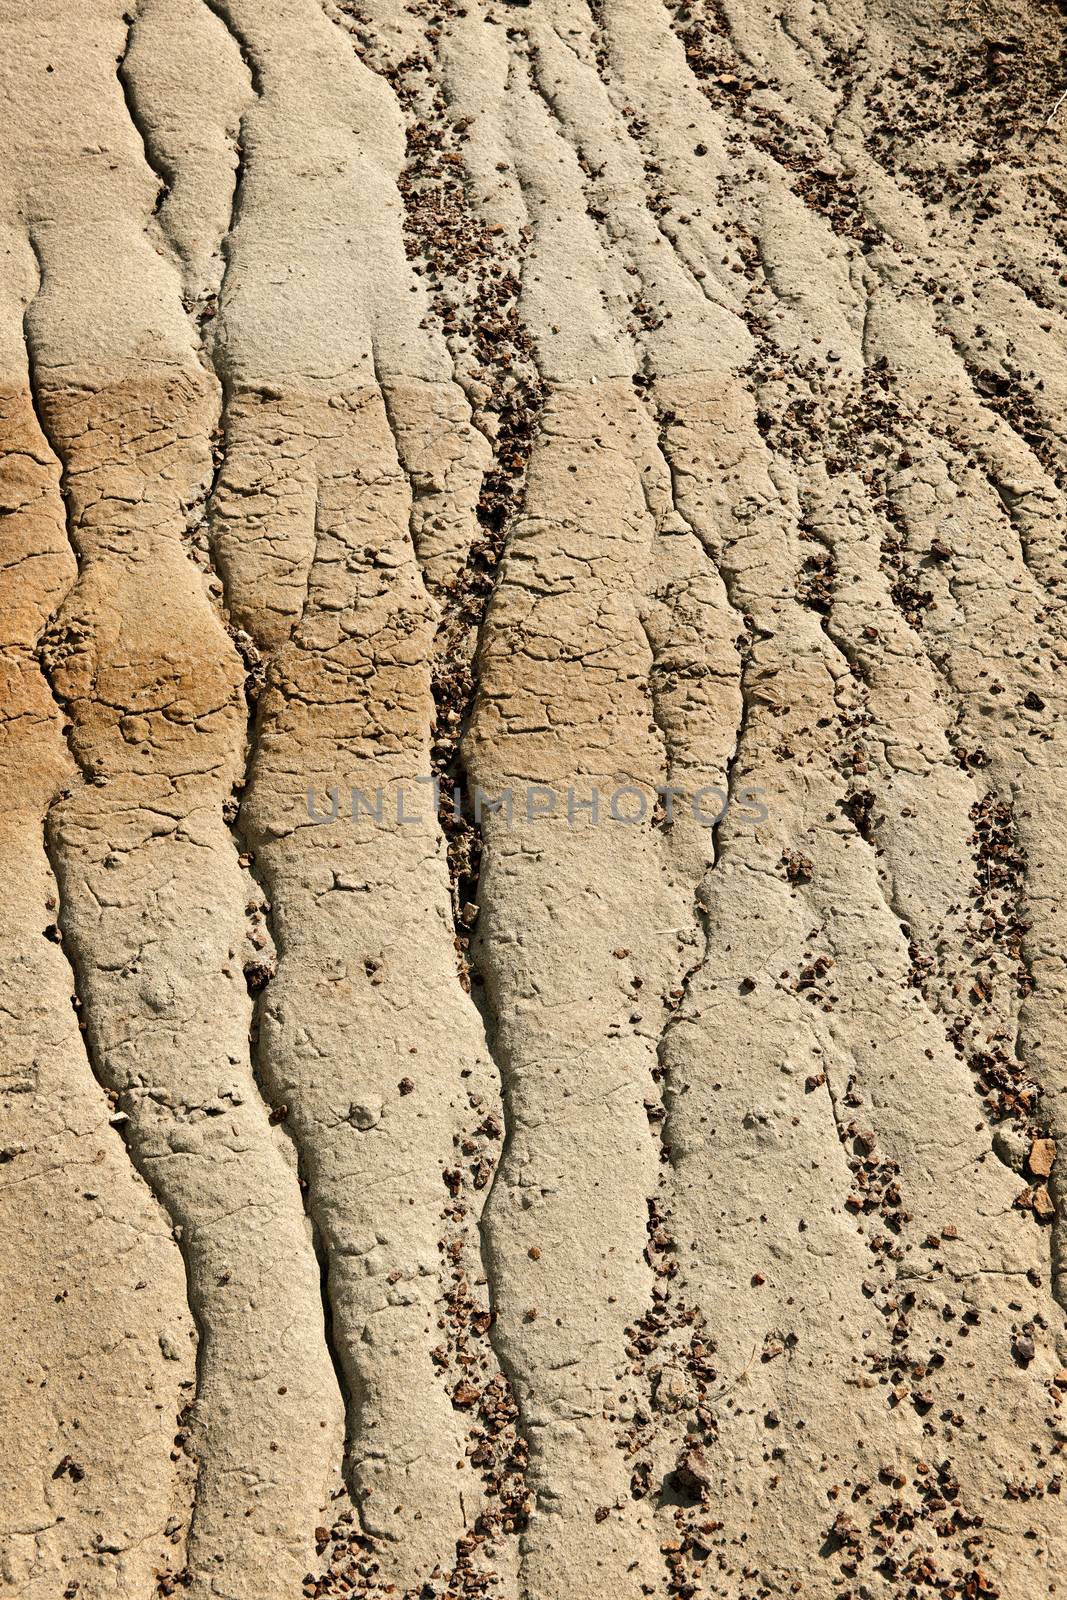 Close up of eroded soil patterns in badlands in Alberta, Canada